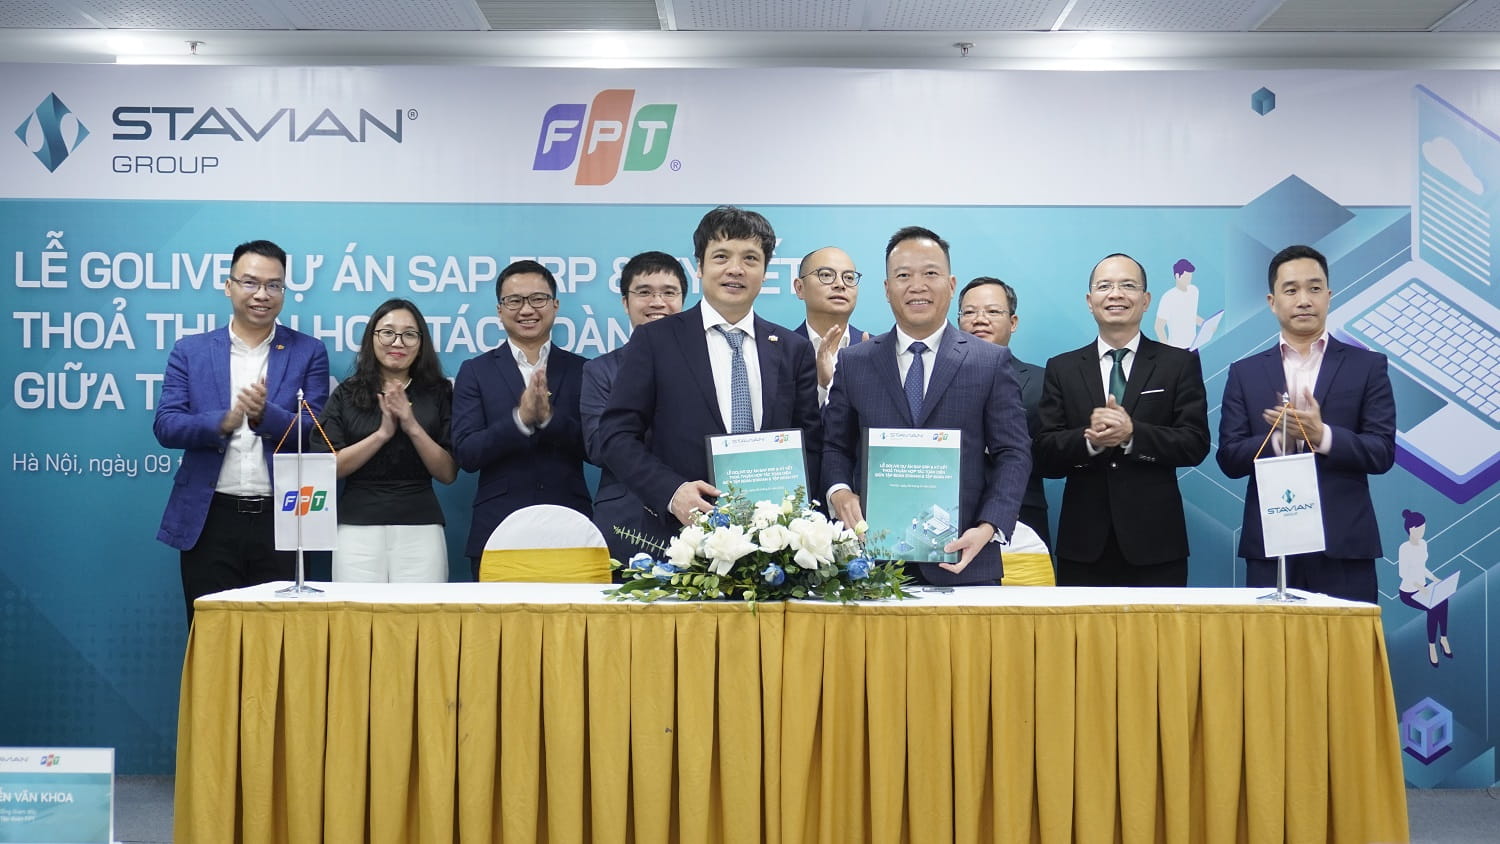 Mr. Dinh Duc Thang - Chairman of Stavian Group - and Mr. Nguyen Van Khoa - CEO of FPT Corporation - signed the cooperation agreement.